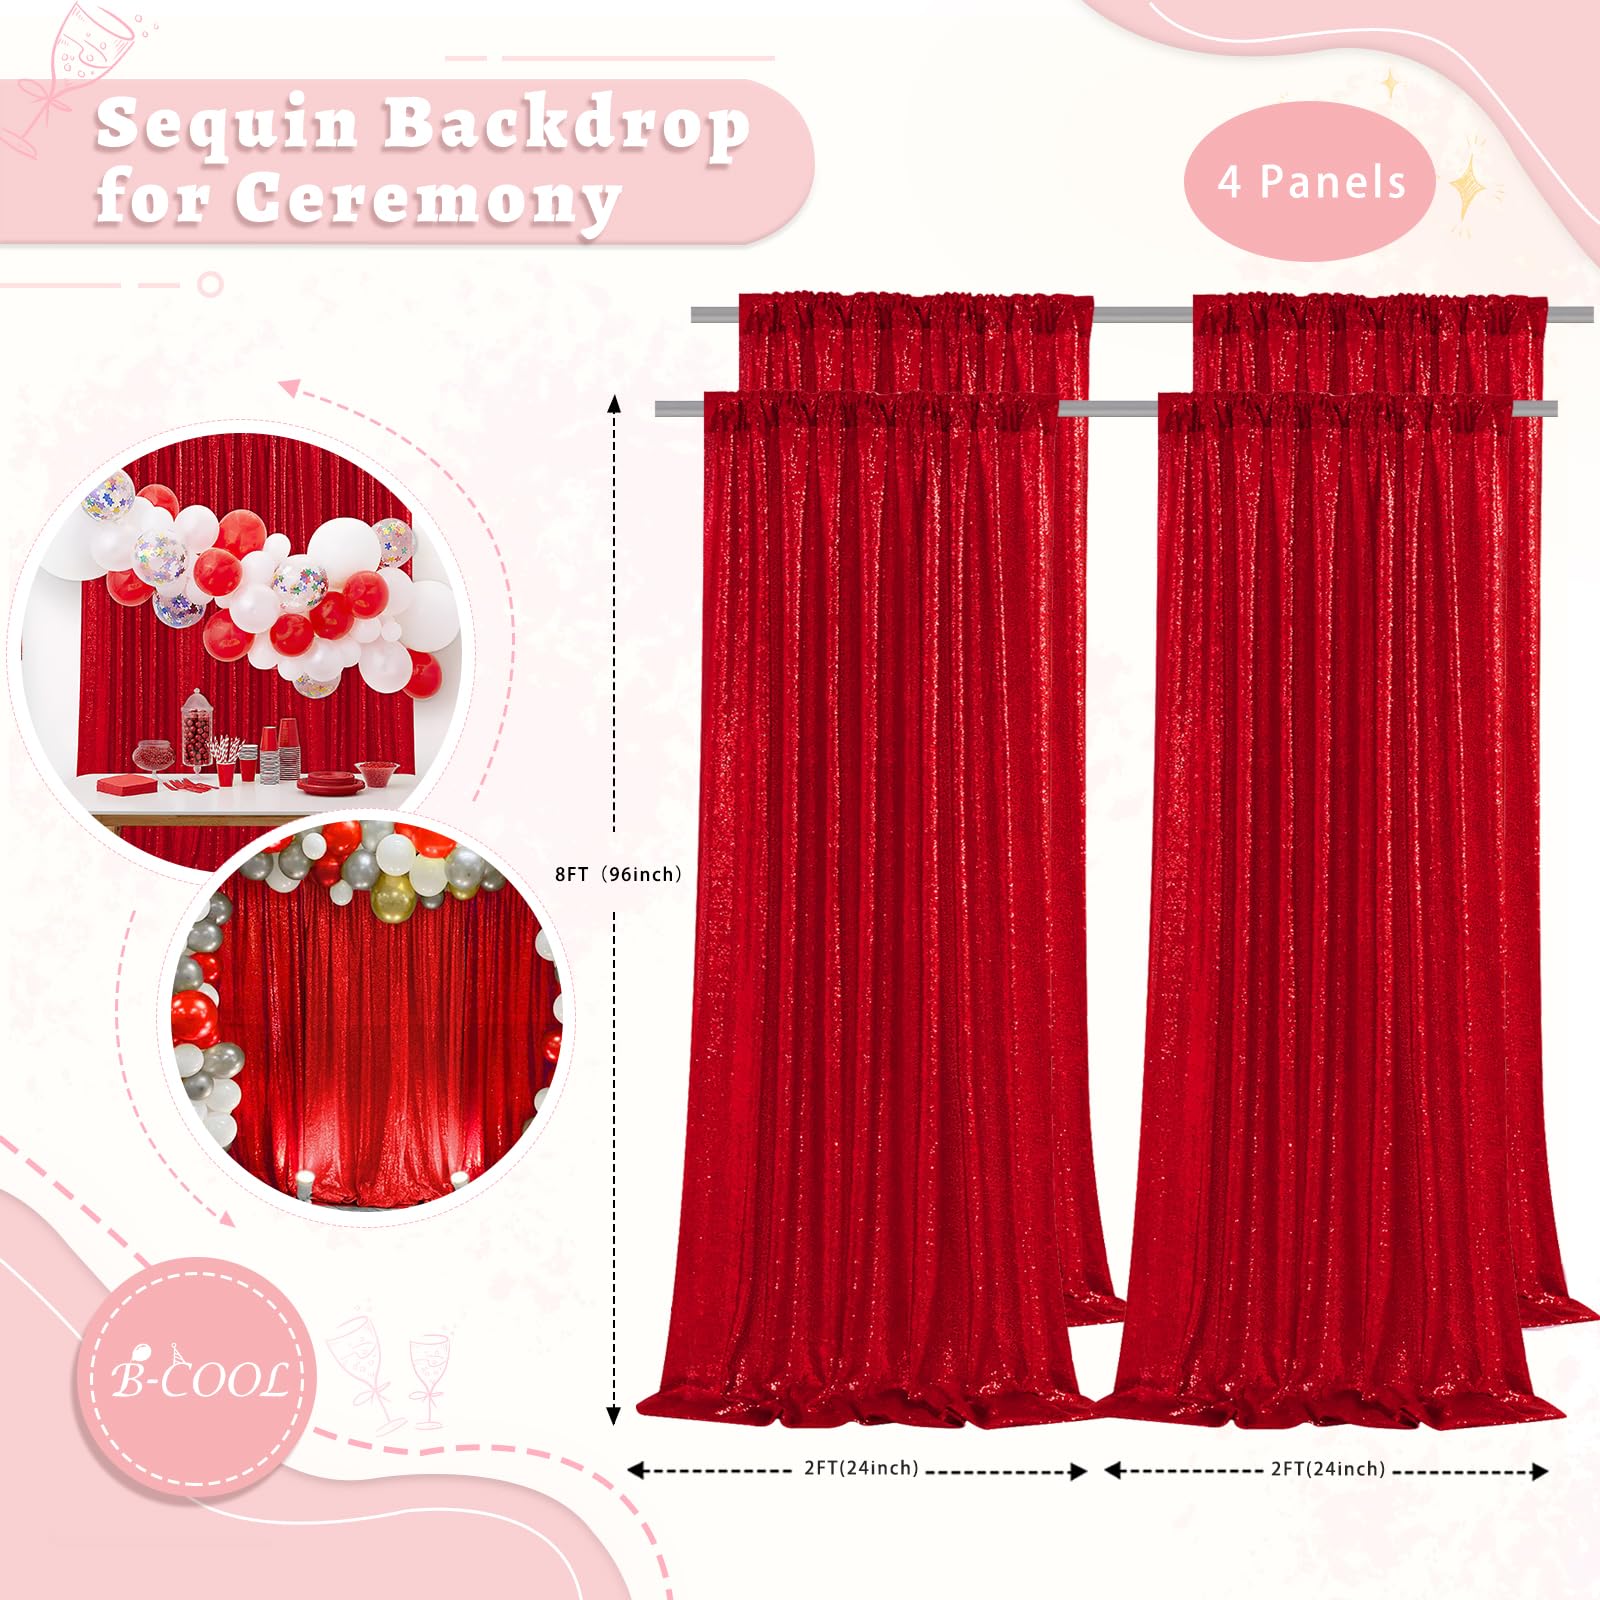 B-COOL 4 Panels 2ftx8ft Red Backdrop Sequin Backdrop Curtain Drapes Fabric for Wedding Holiday Spring Party Photography Decoration